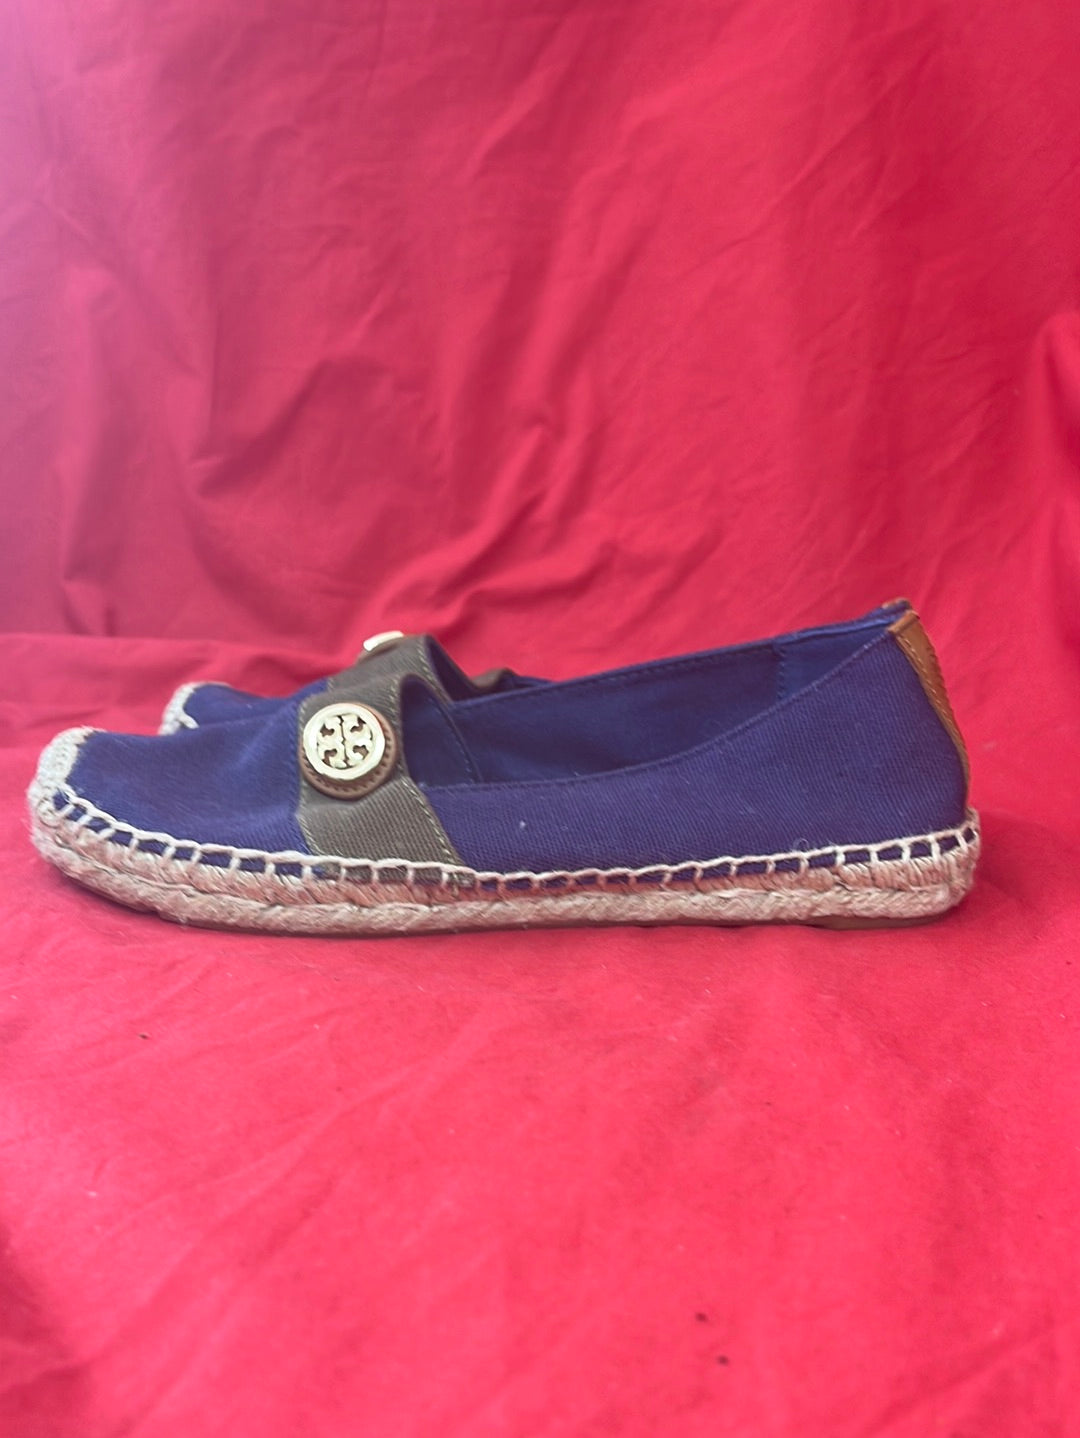 TORY BURCH Beacher Flat Espadrilles in Navy and Olive  -- Size 6M